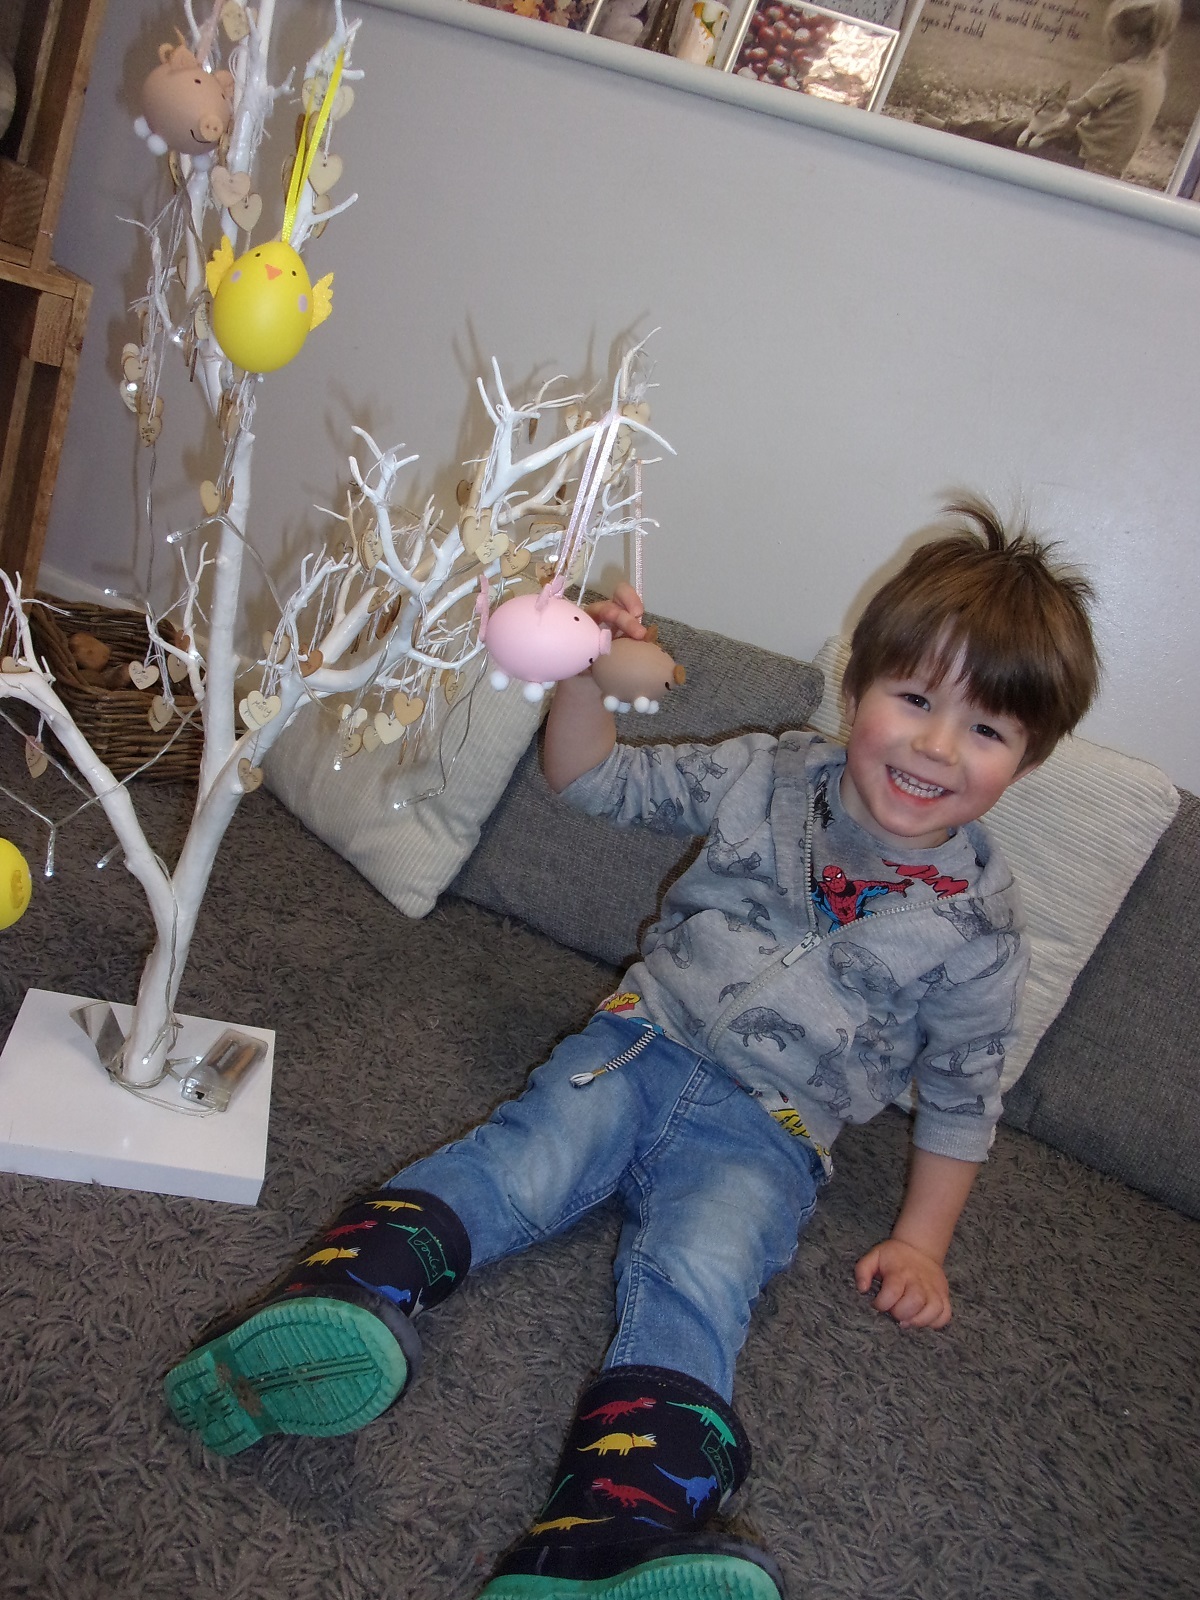 Branching out - Thomas Coates is busy decorating an Easter tree